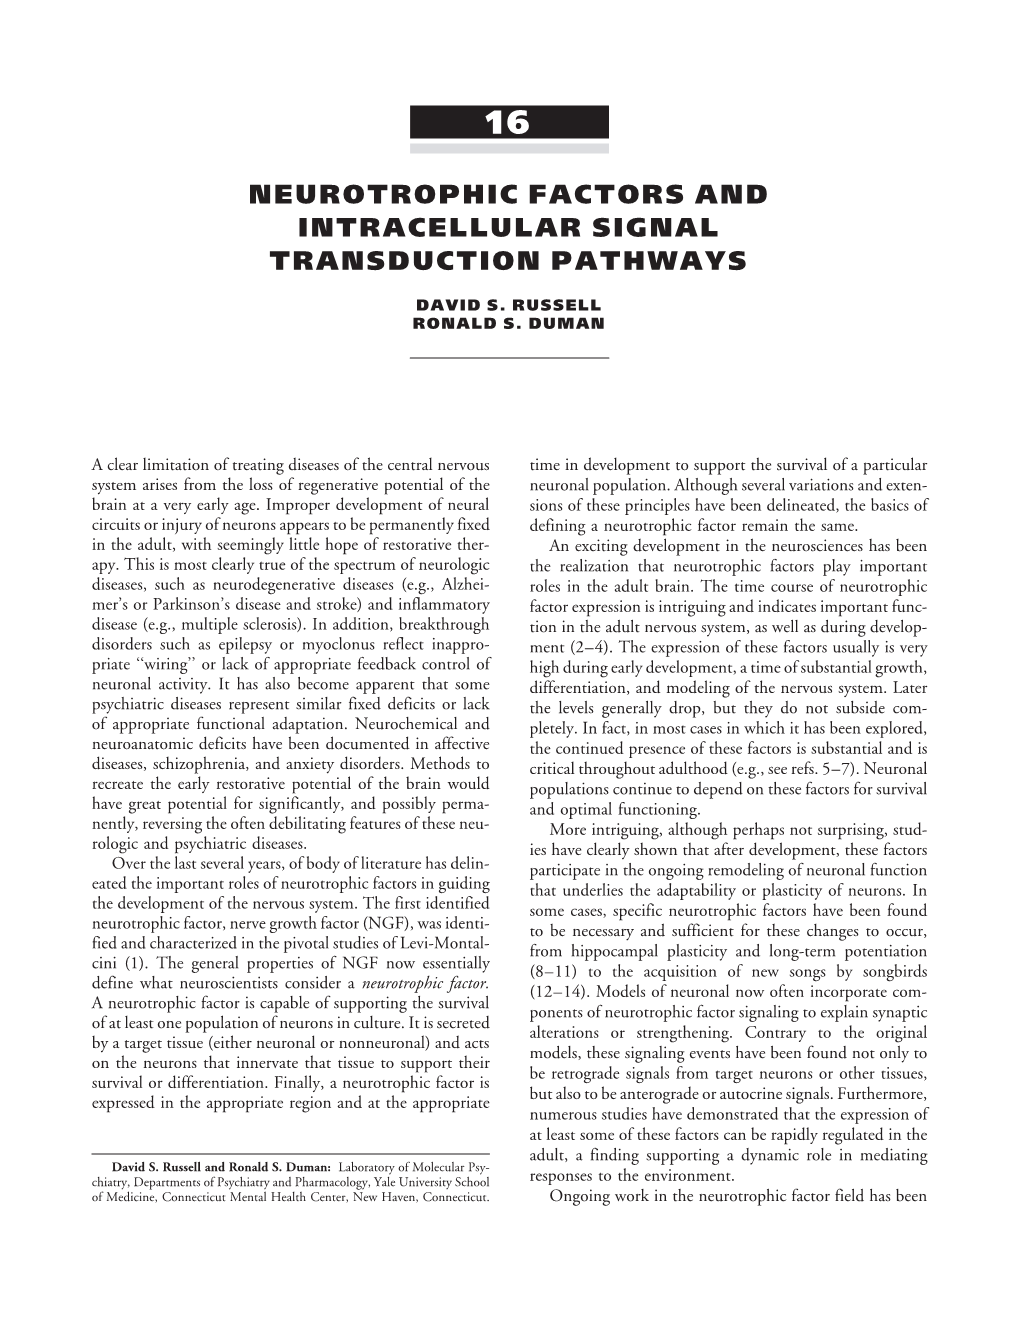 Neurotrophic Factors and Intracellular Signal Transduction Pathways (PDF)